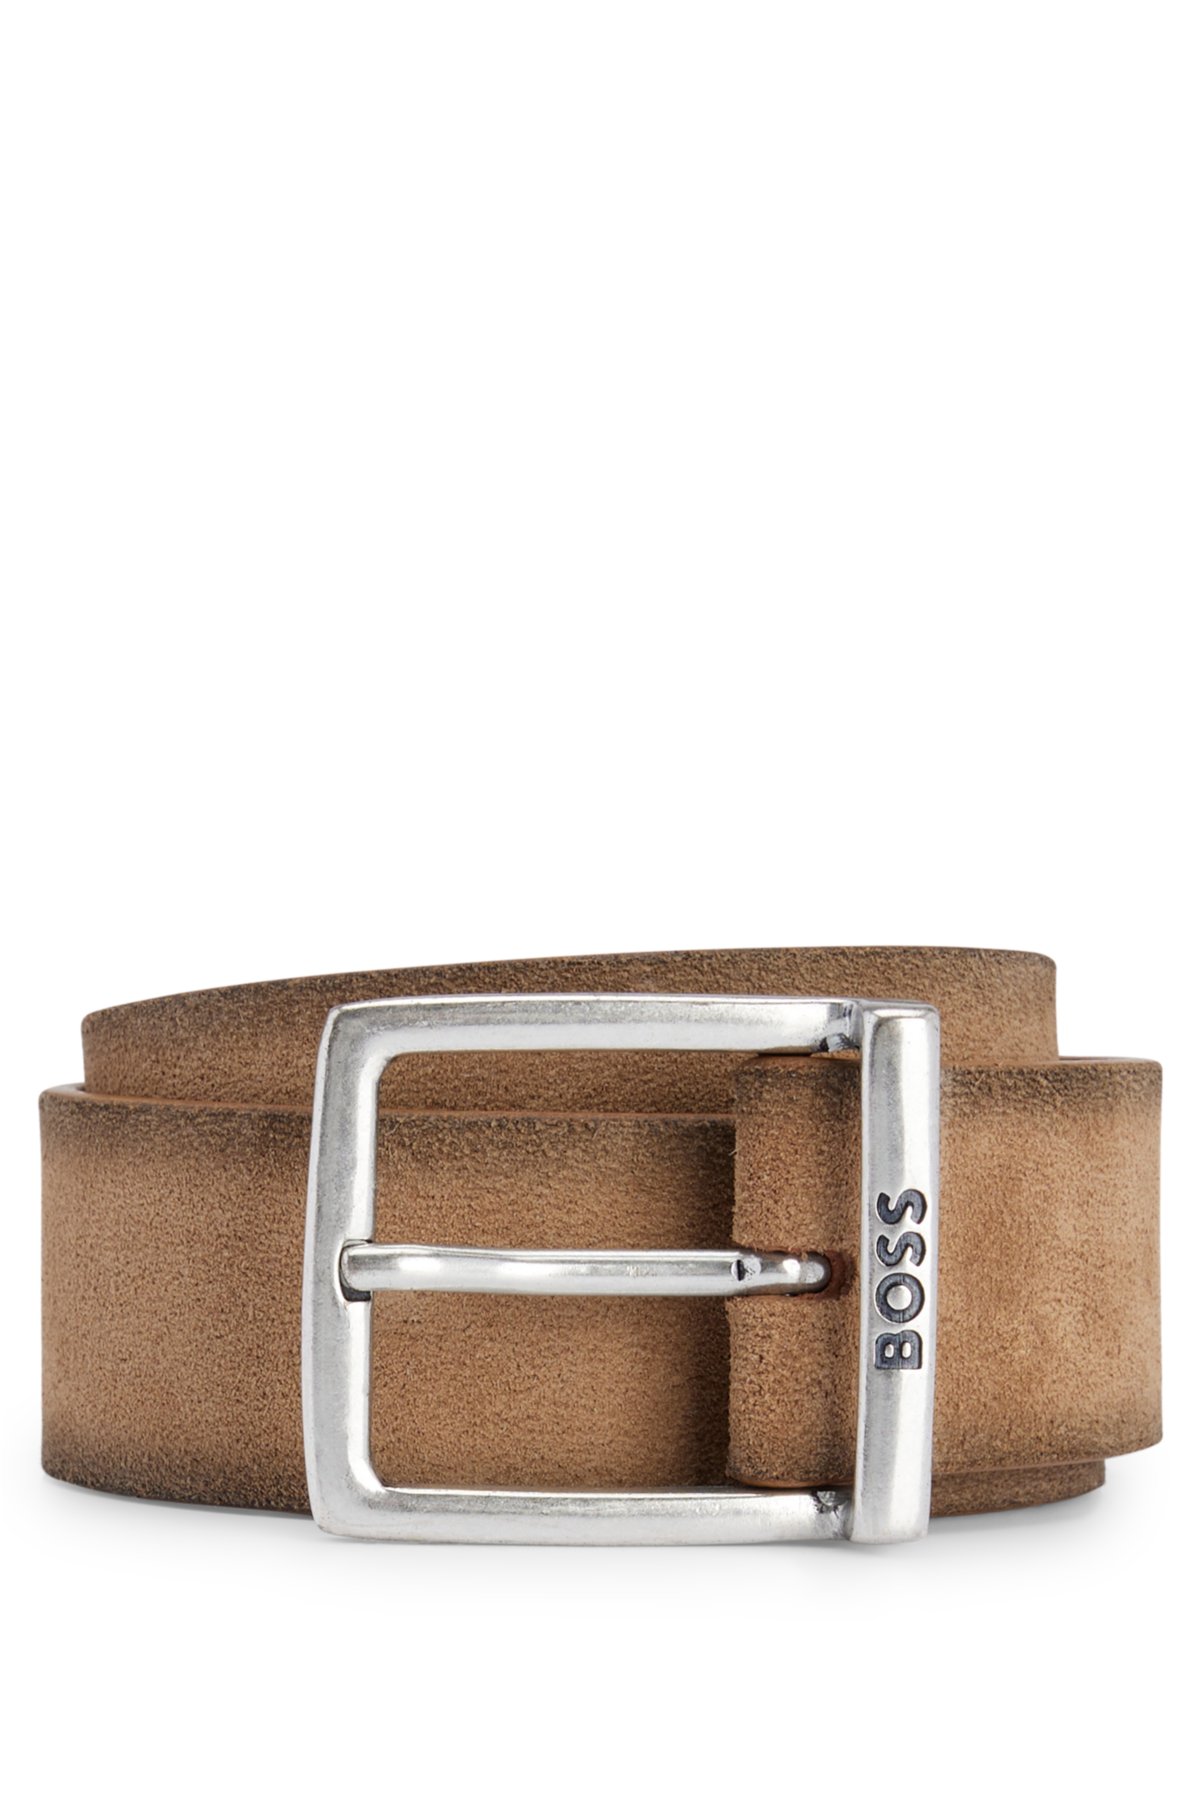 BOSS - Suede belt engraved squared with logo and buckle